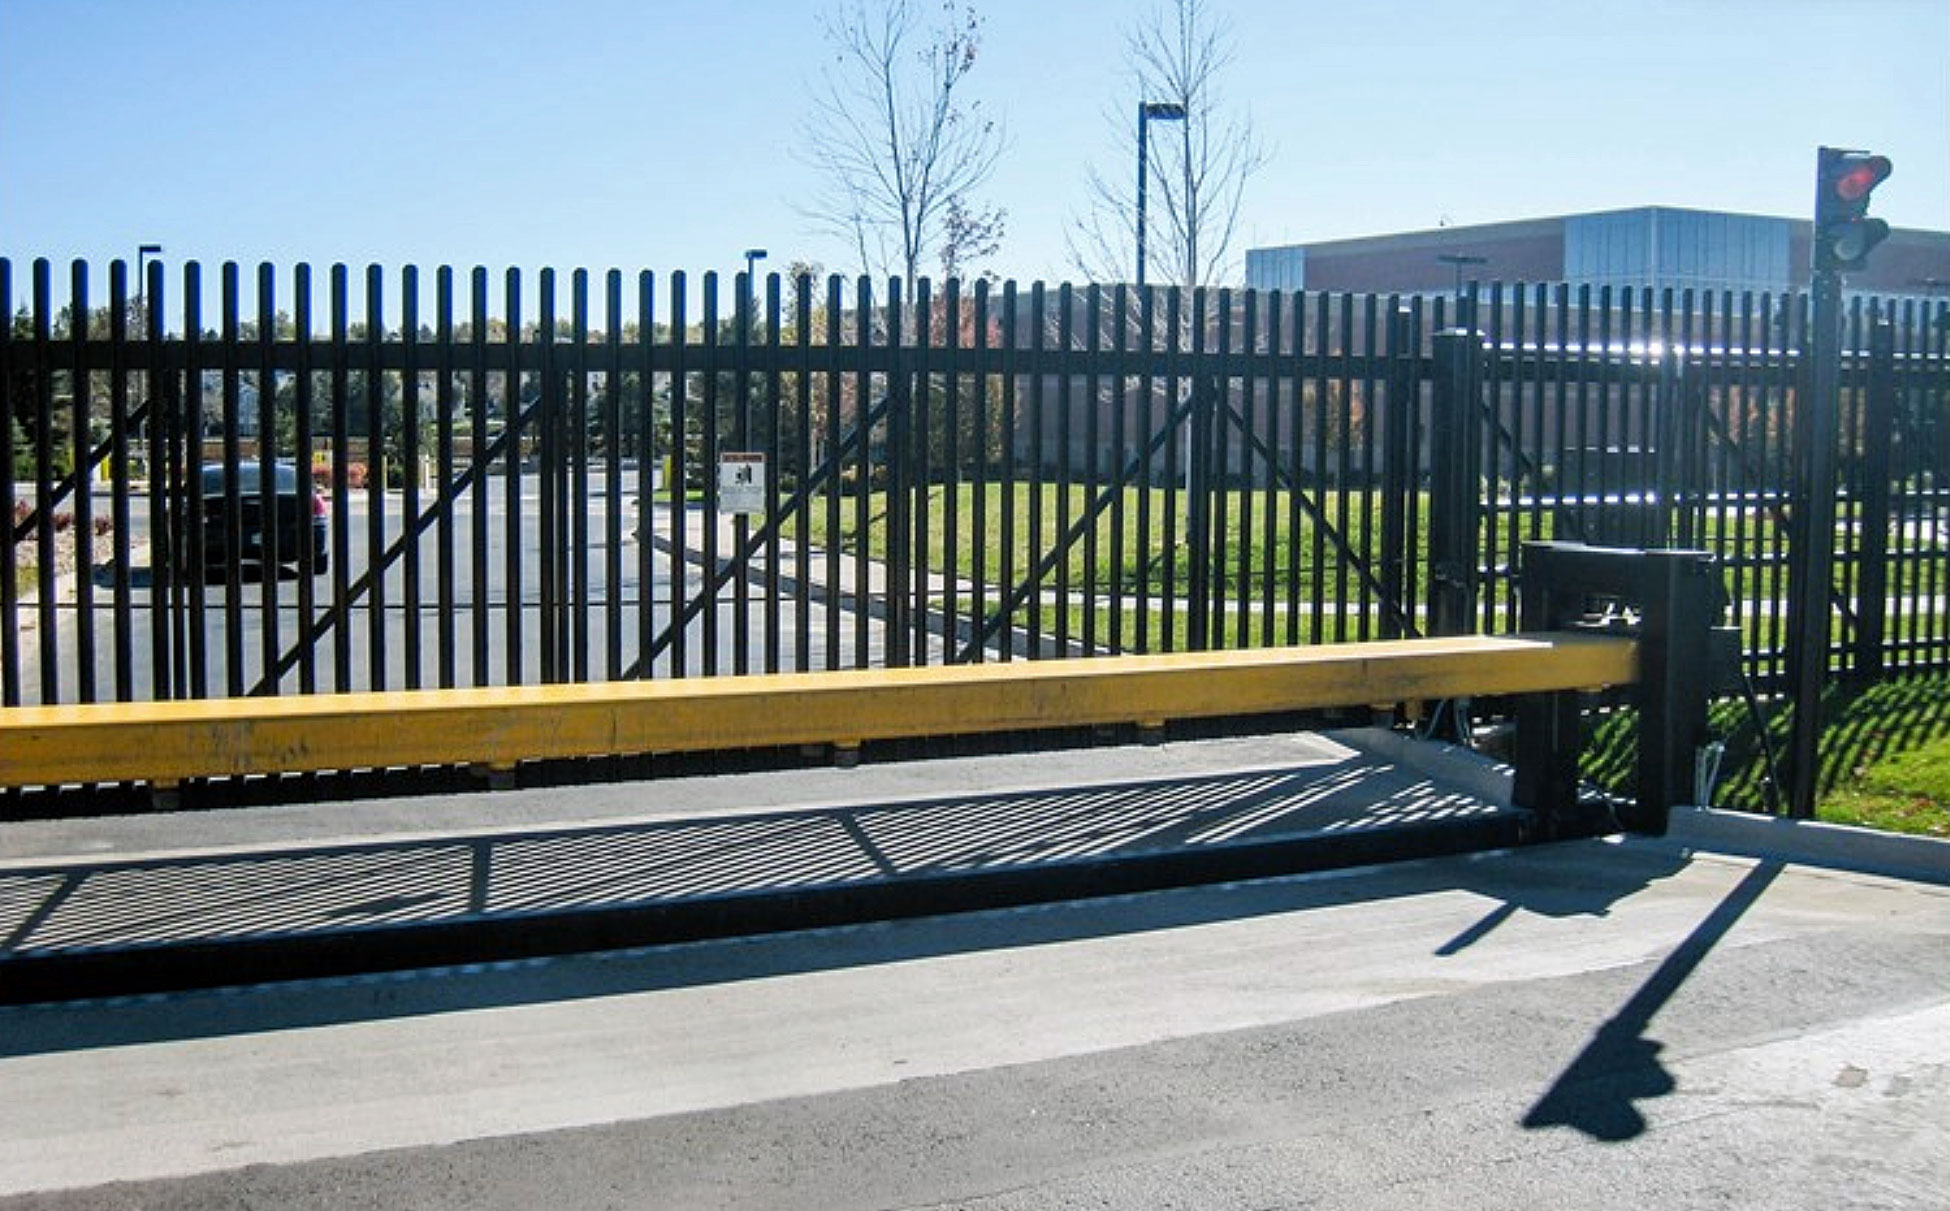 Patriot rising beam barriers offer the highest level of protection for entry control access. Traversing a maximum distance of 24', the Patriot beam barrier blocks entire roadways from any potential threat or unauthorized vehicle